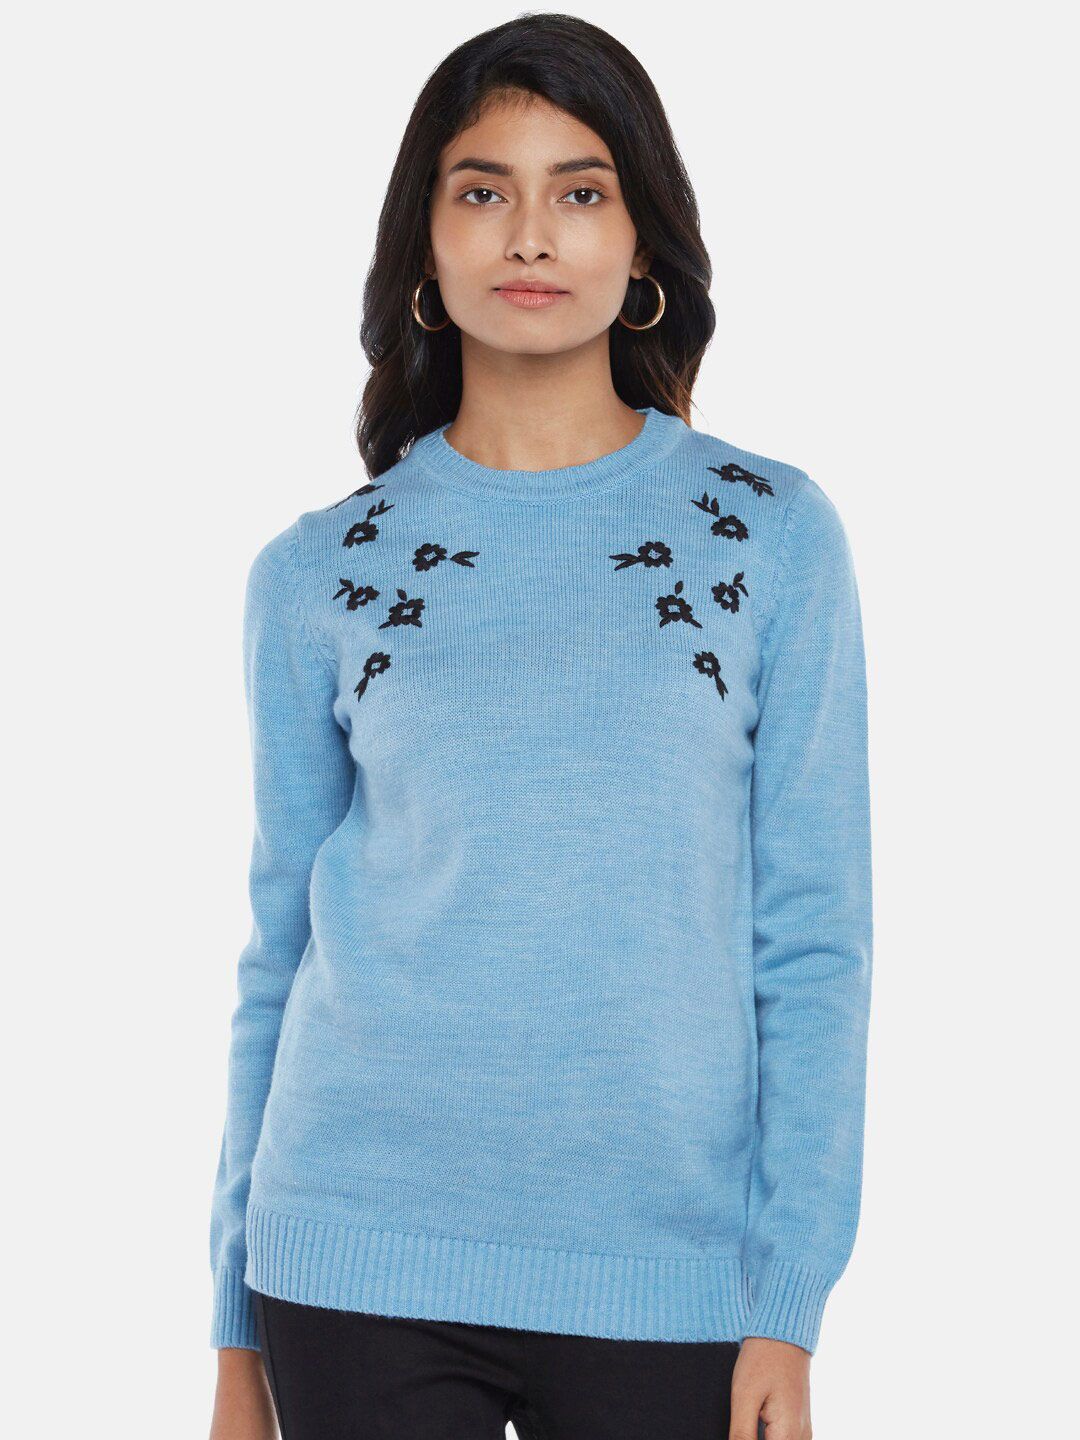 Honey by Pantaloons Women Blue & Black Pullover Price in India